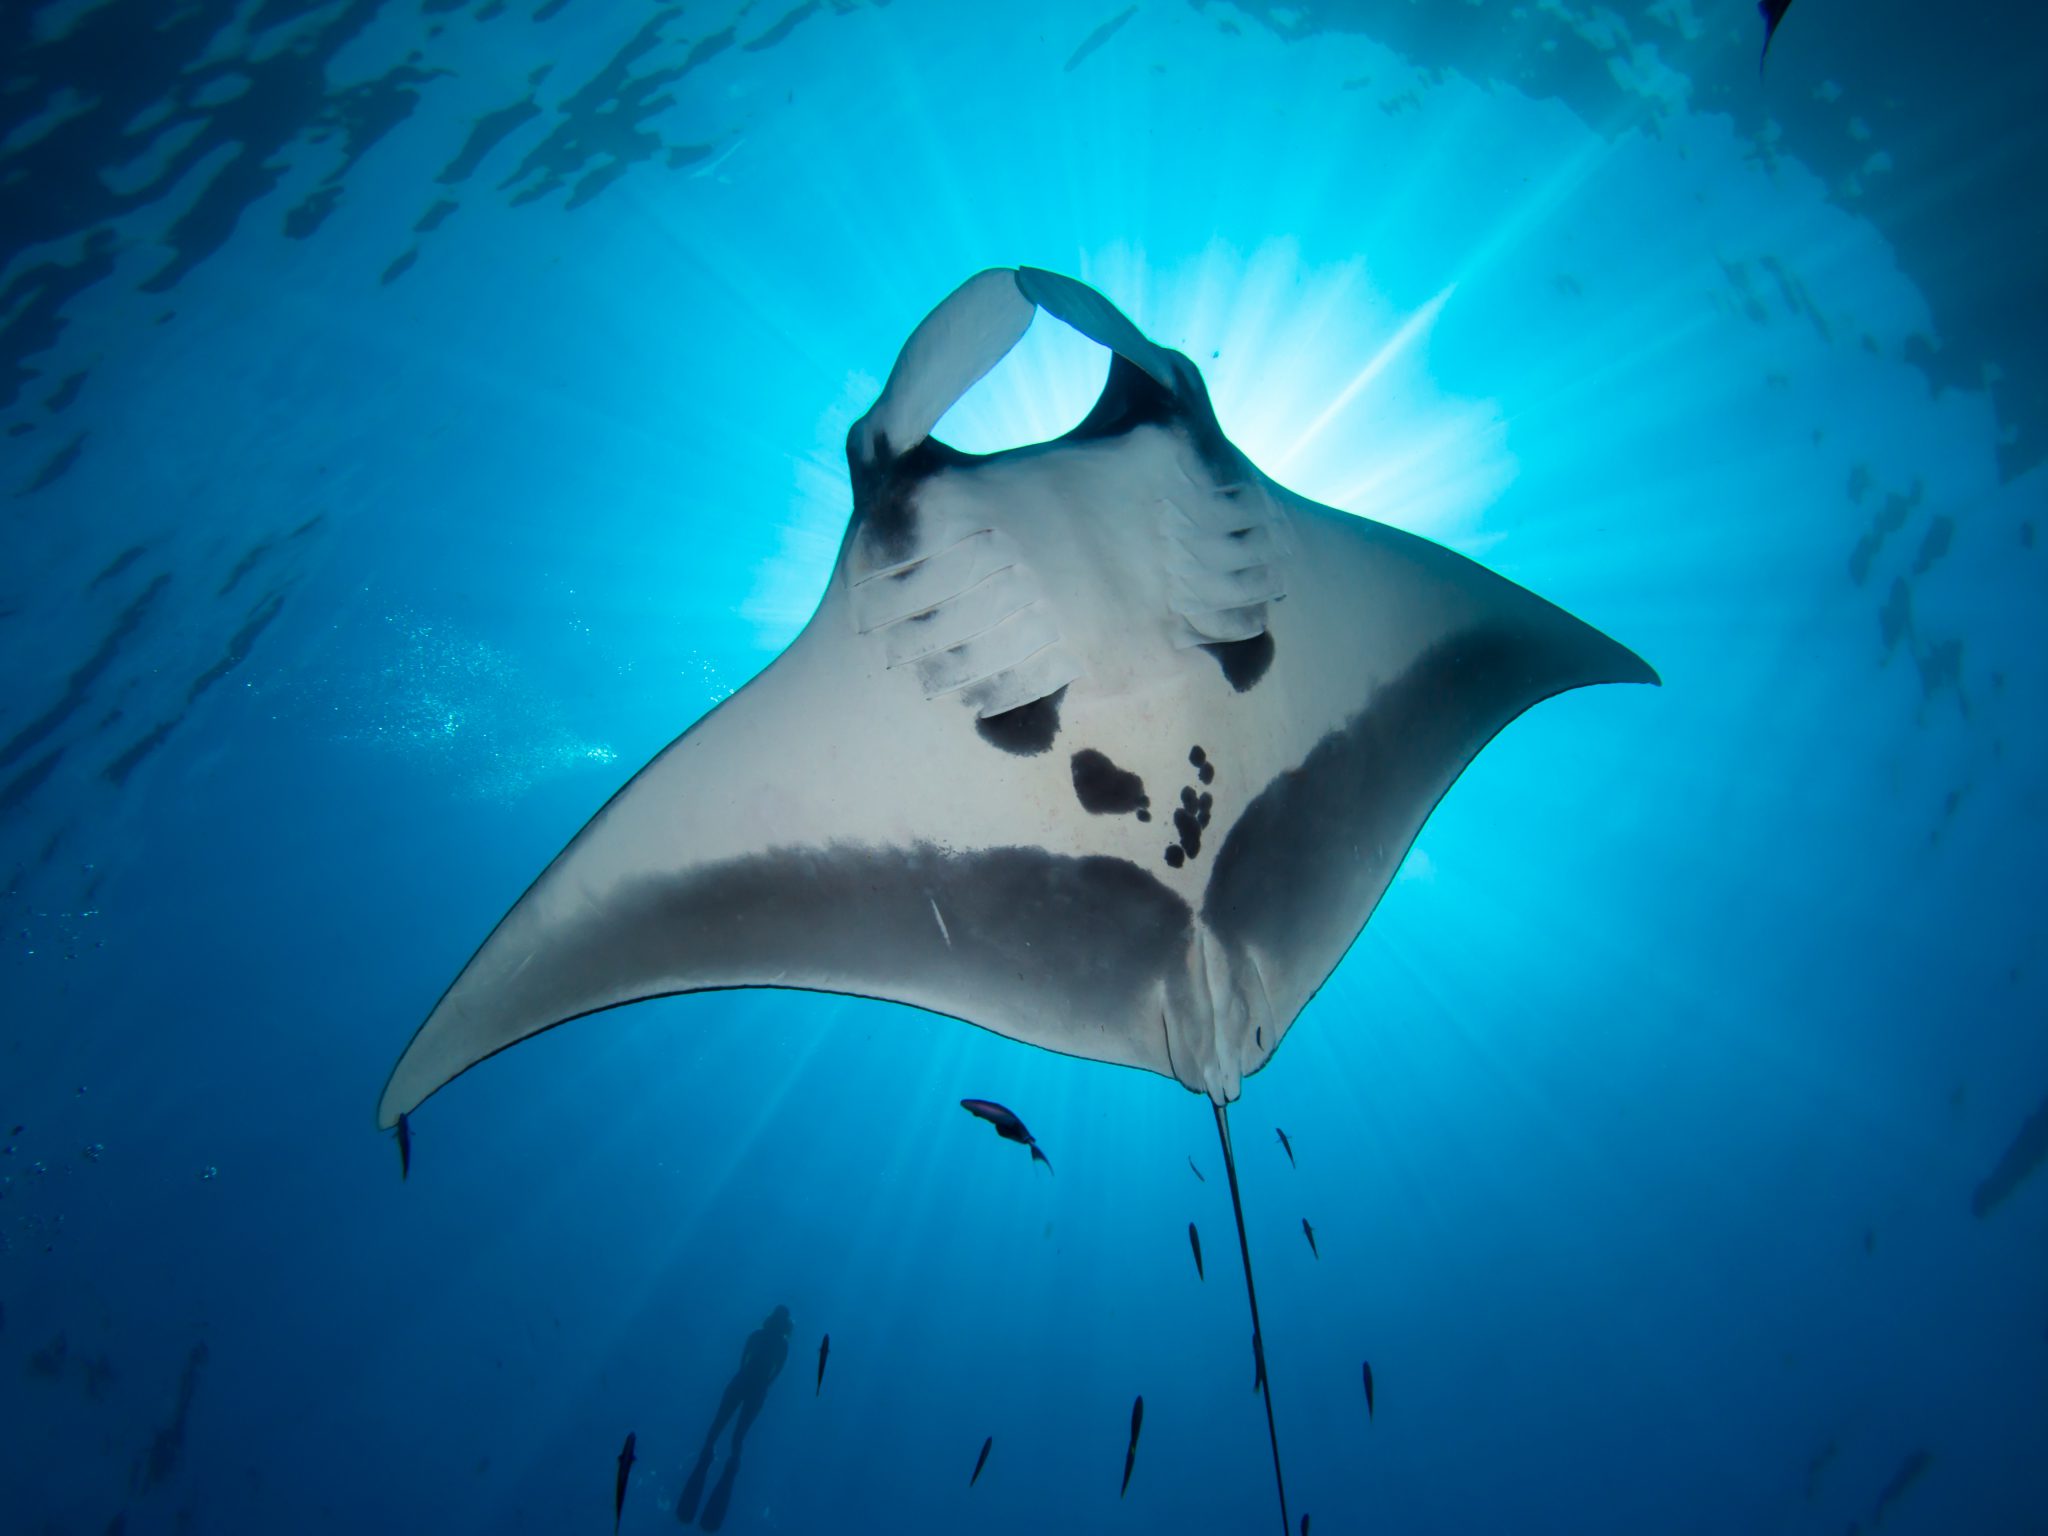 A manta ray gliding through the water - and a favorite pelagic to look out for when diving at Ari Atoll, Maldives 